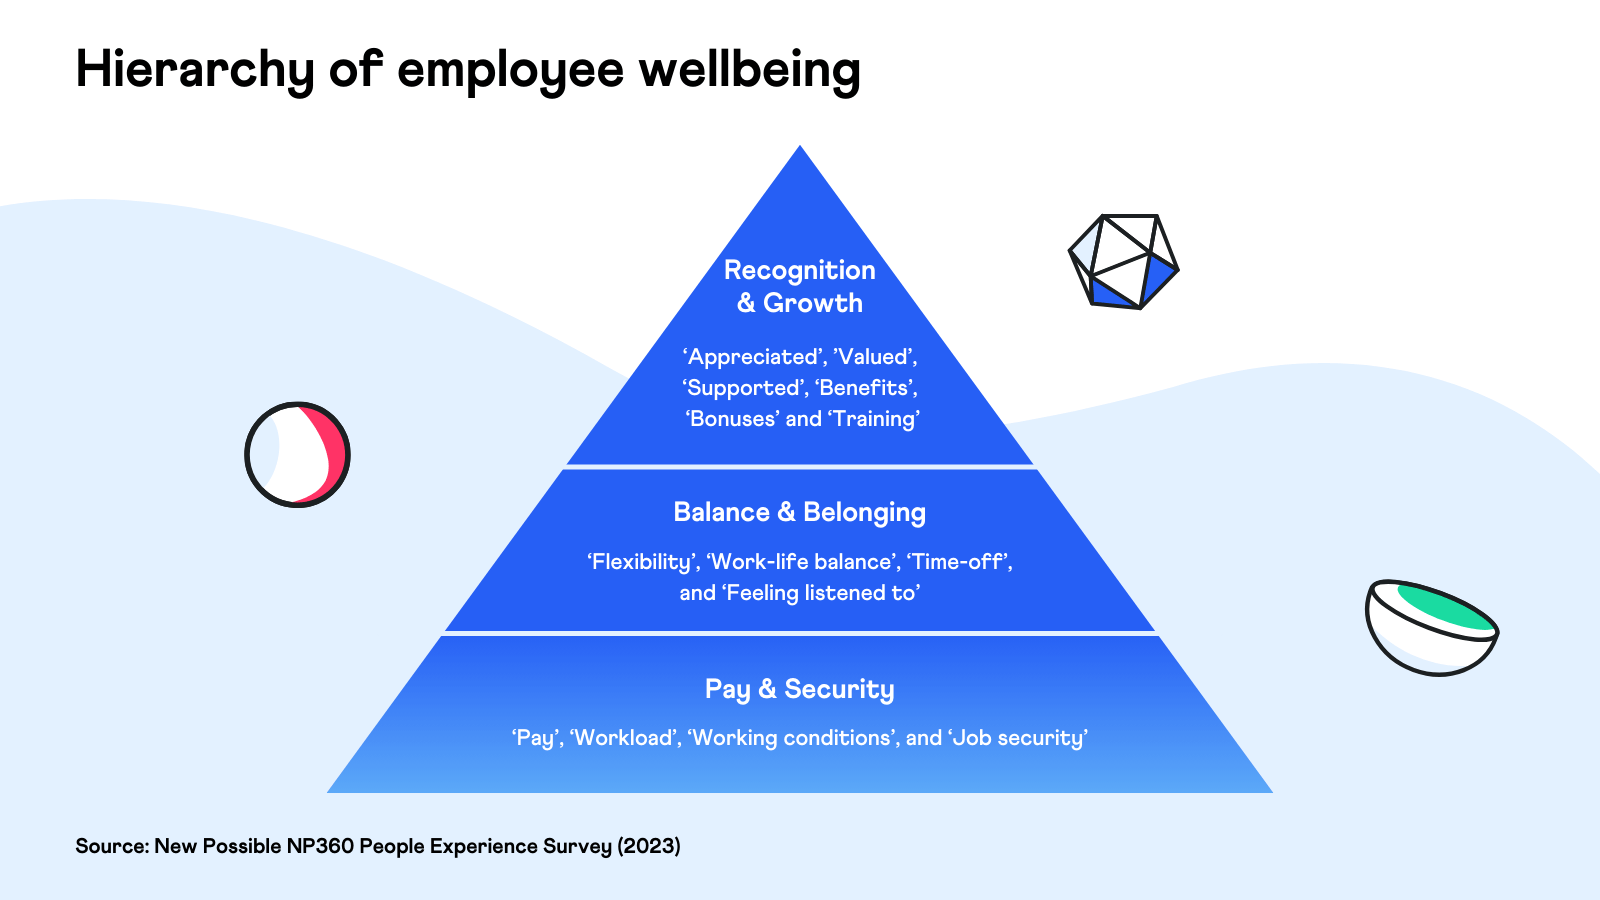 Hierarchy of employee wellbeing - New Possible